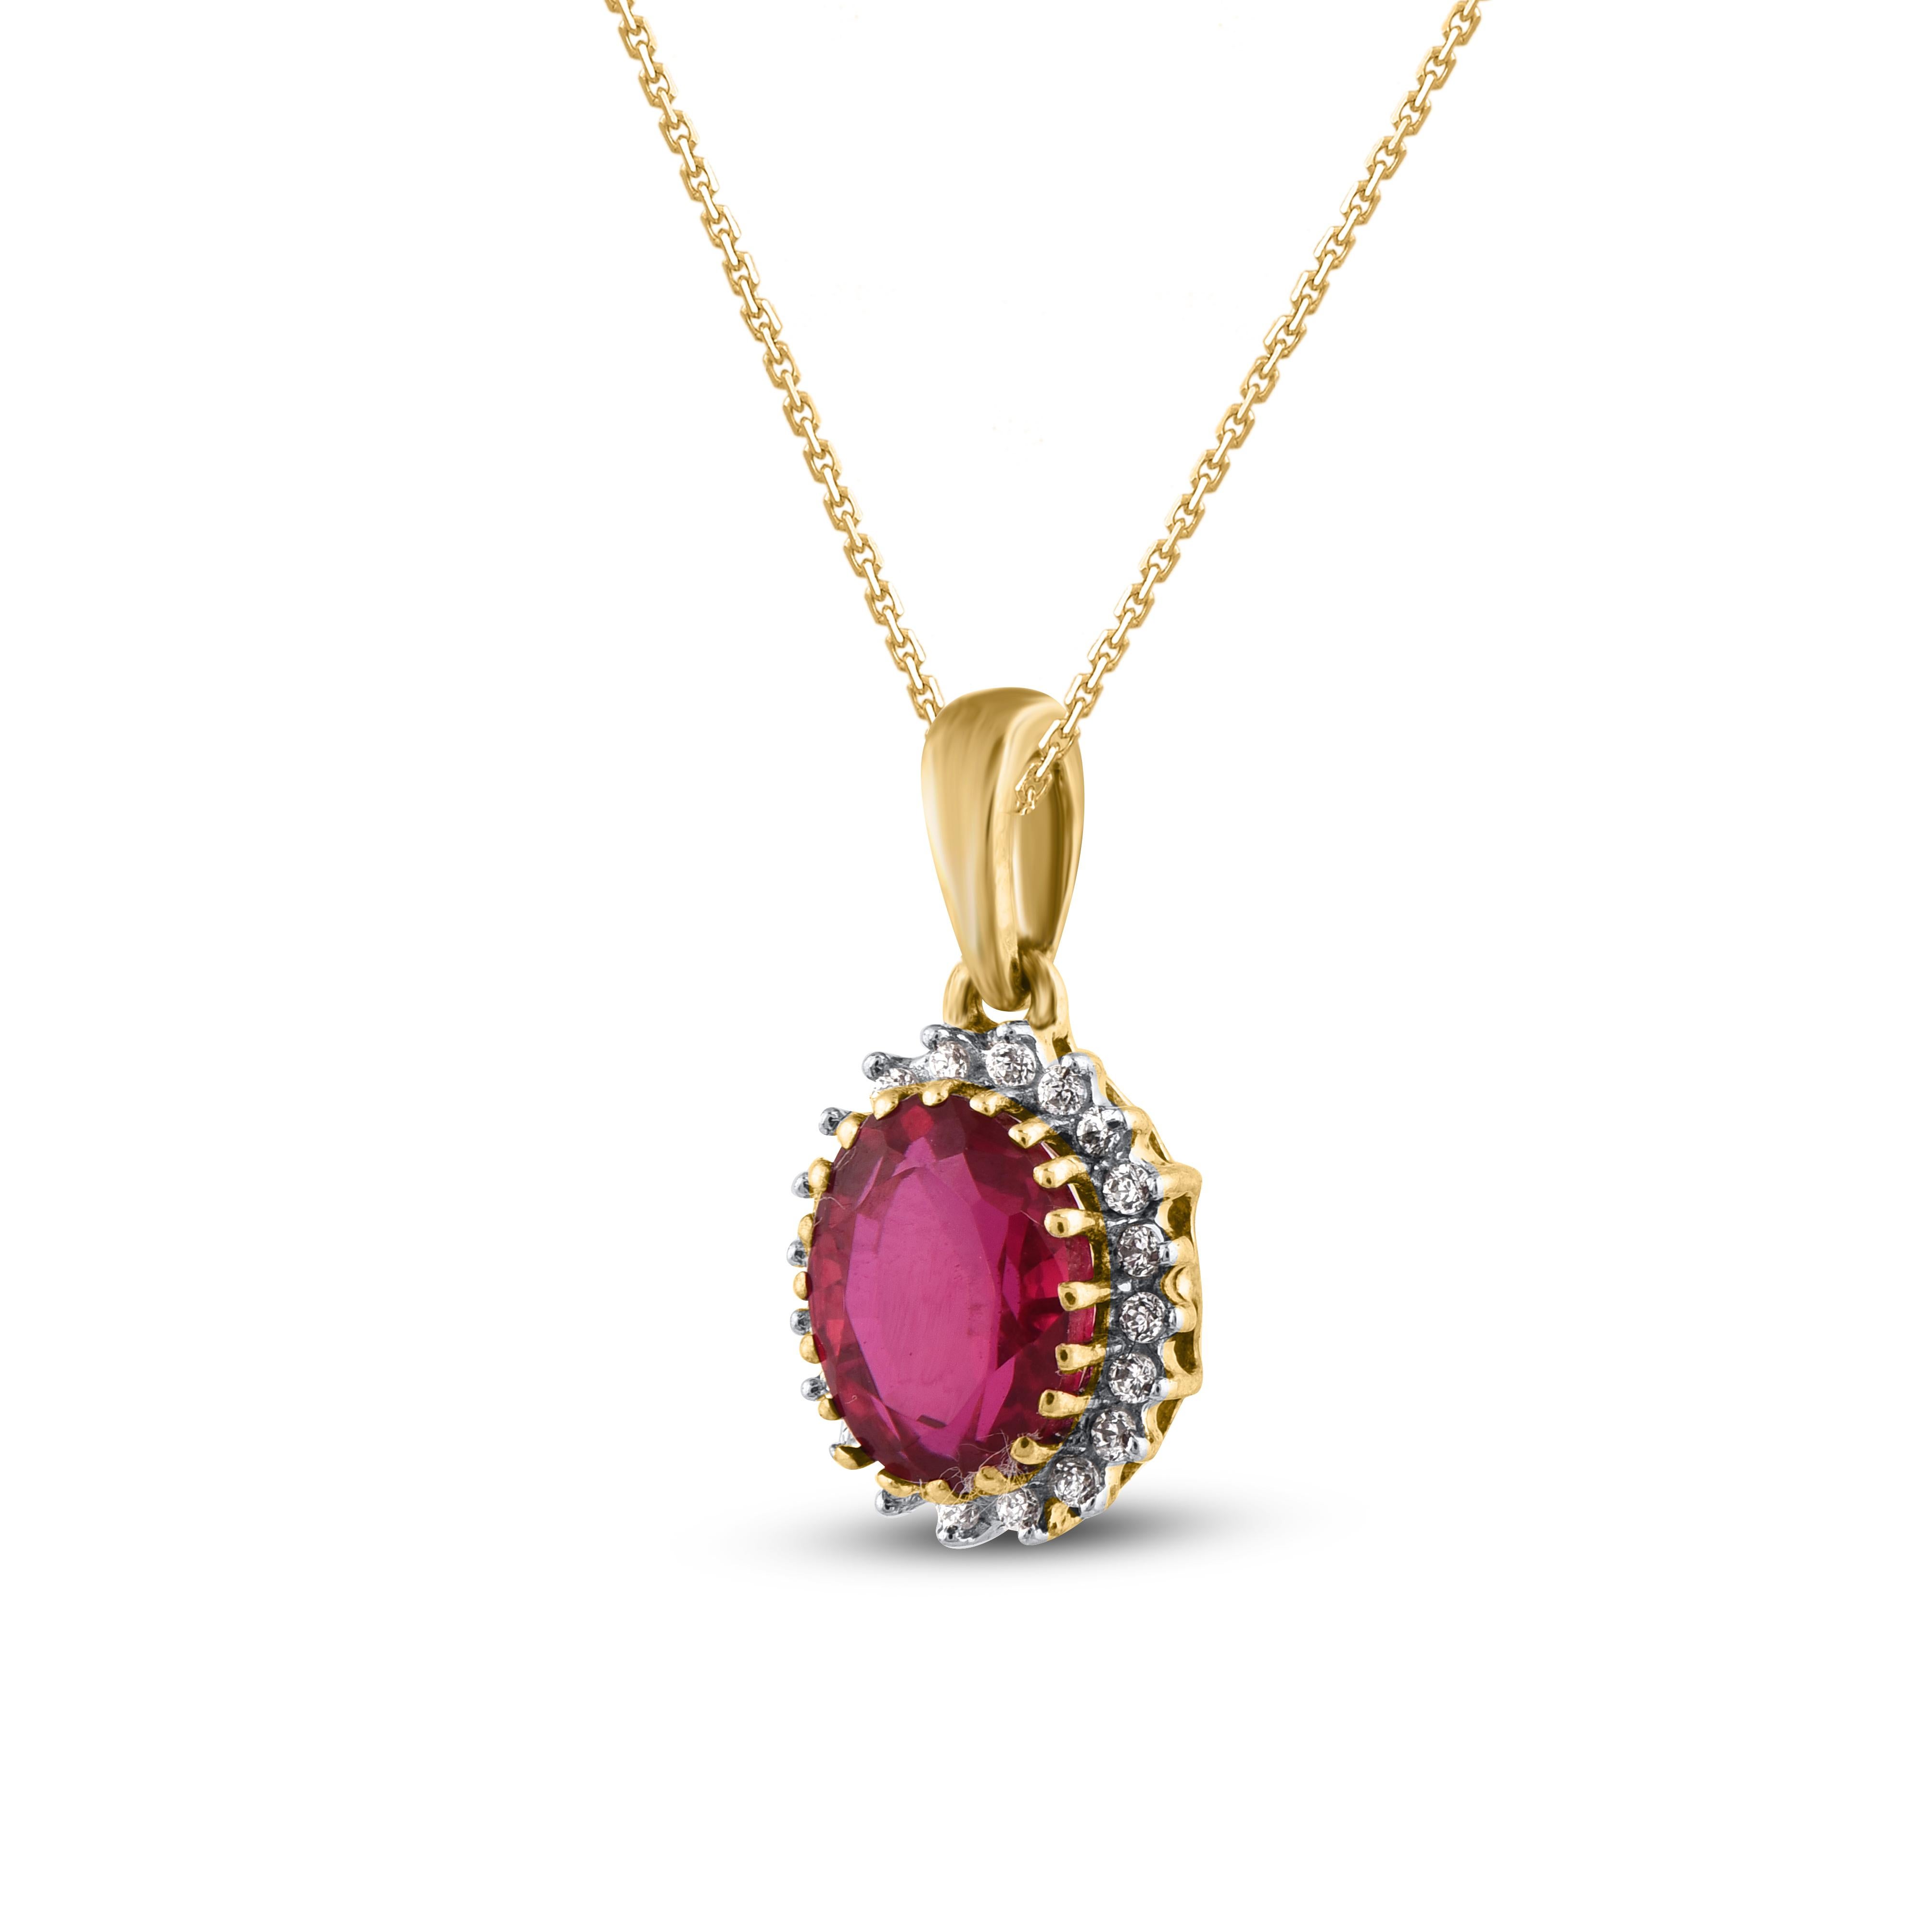 Contemporary TJD 1.10 Carat Diamond and Oval Ruby 14 Karat Yellow Gold Halo Pendant Necklace For Sale